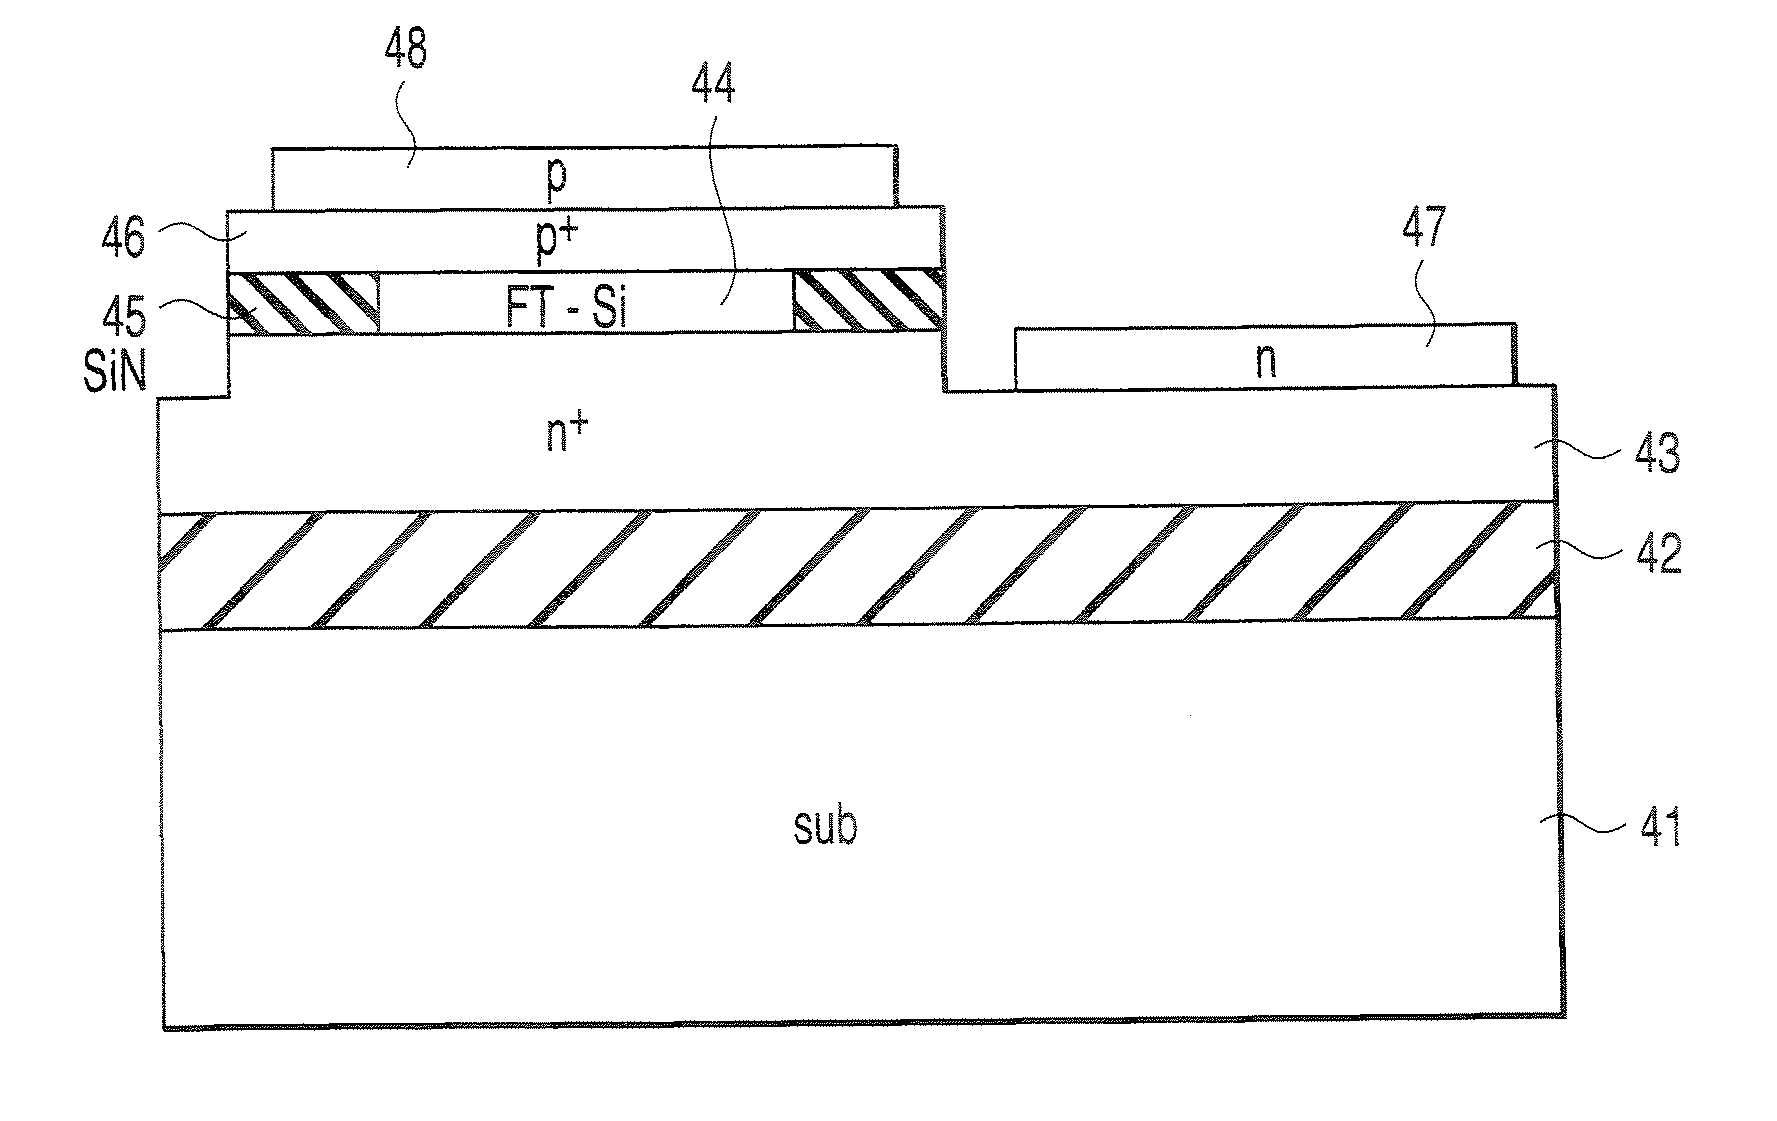 Semiconductor light-emitting material with tetrahedral structure formed therein